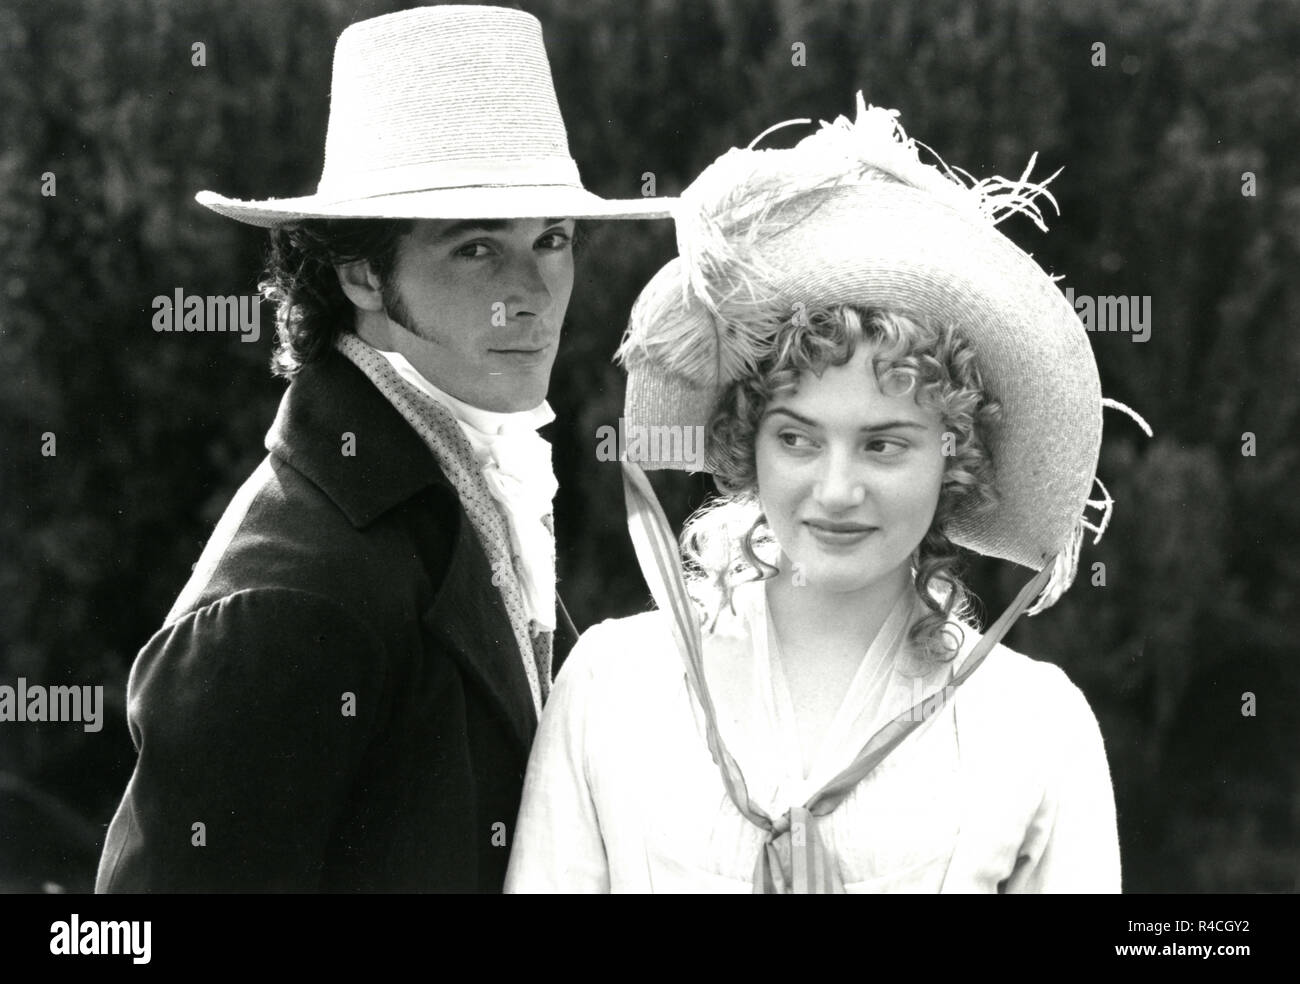 Actors Greg Wise and Kate Winslet in the movie Sense and Sensibility, 1995 Stock Photo -